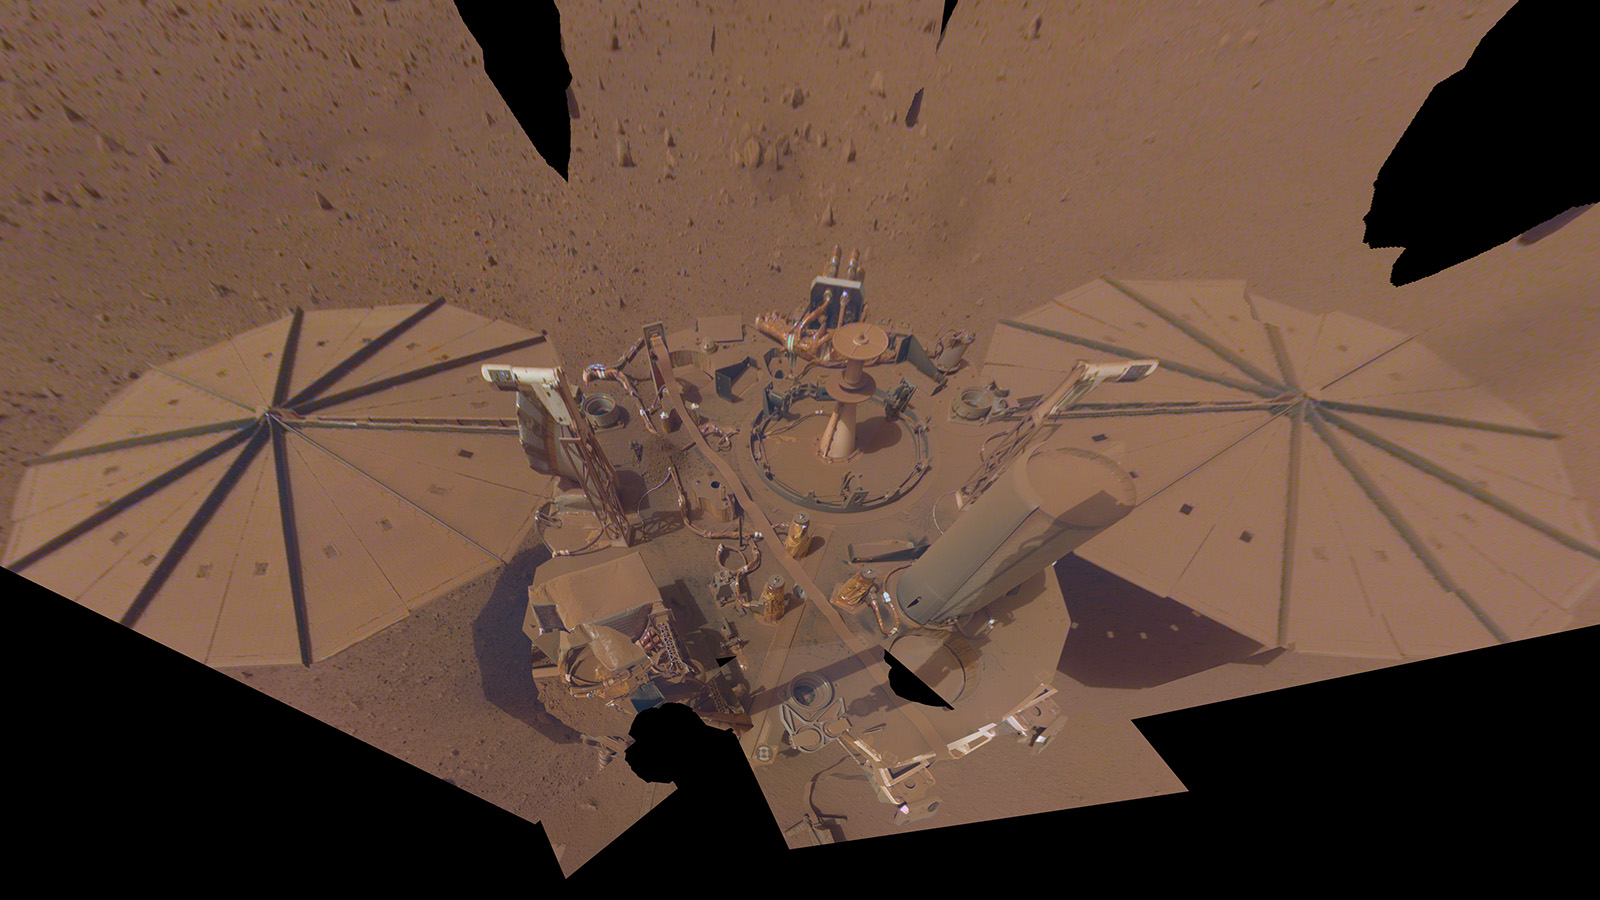 slide 4 - InSight Study Finds Mars Is Spinning Faster